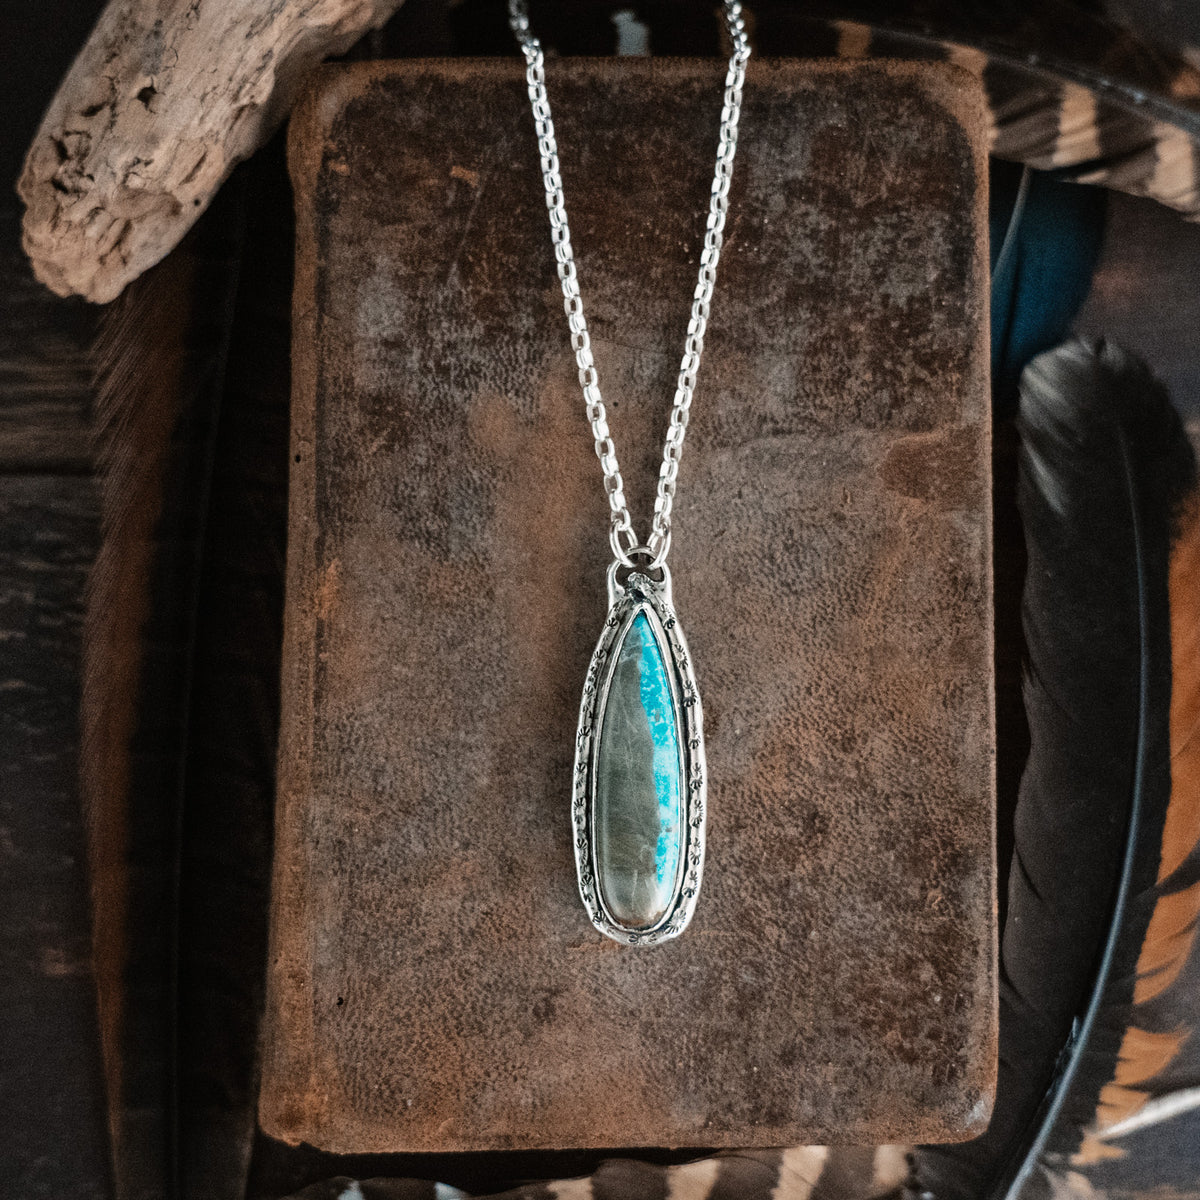 Into the Blue Turquoise Necklace